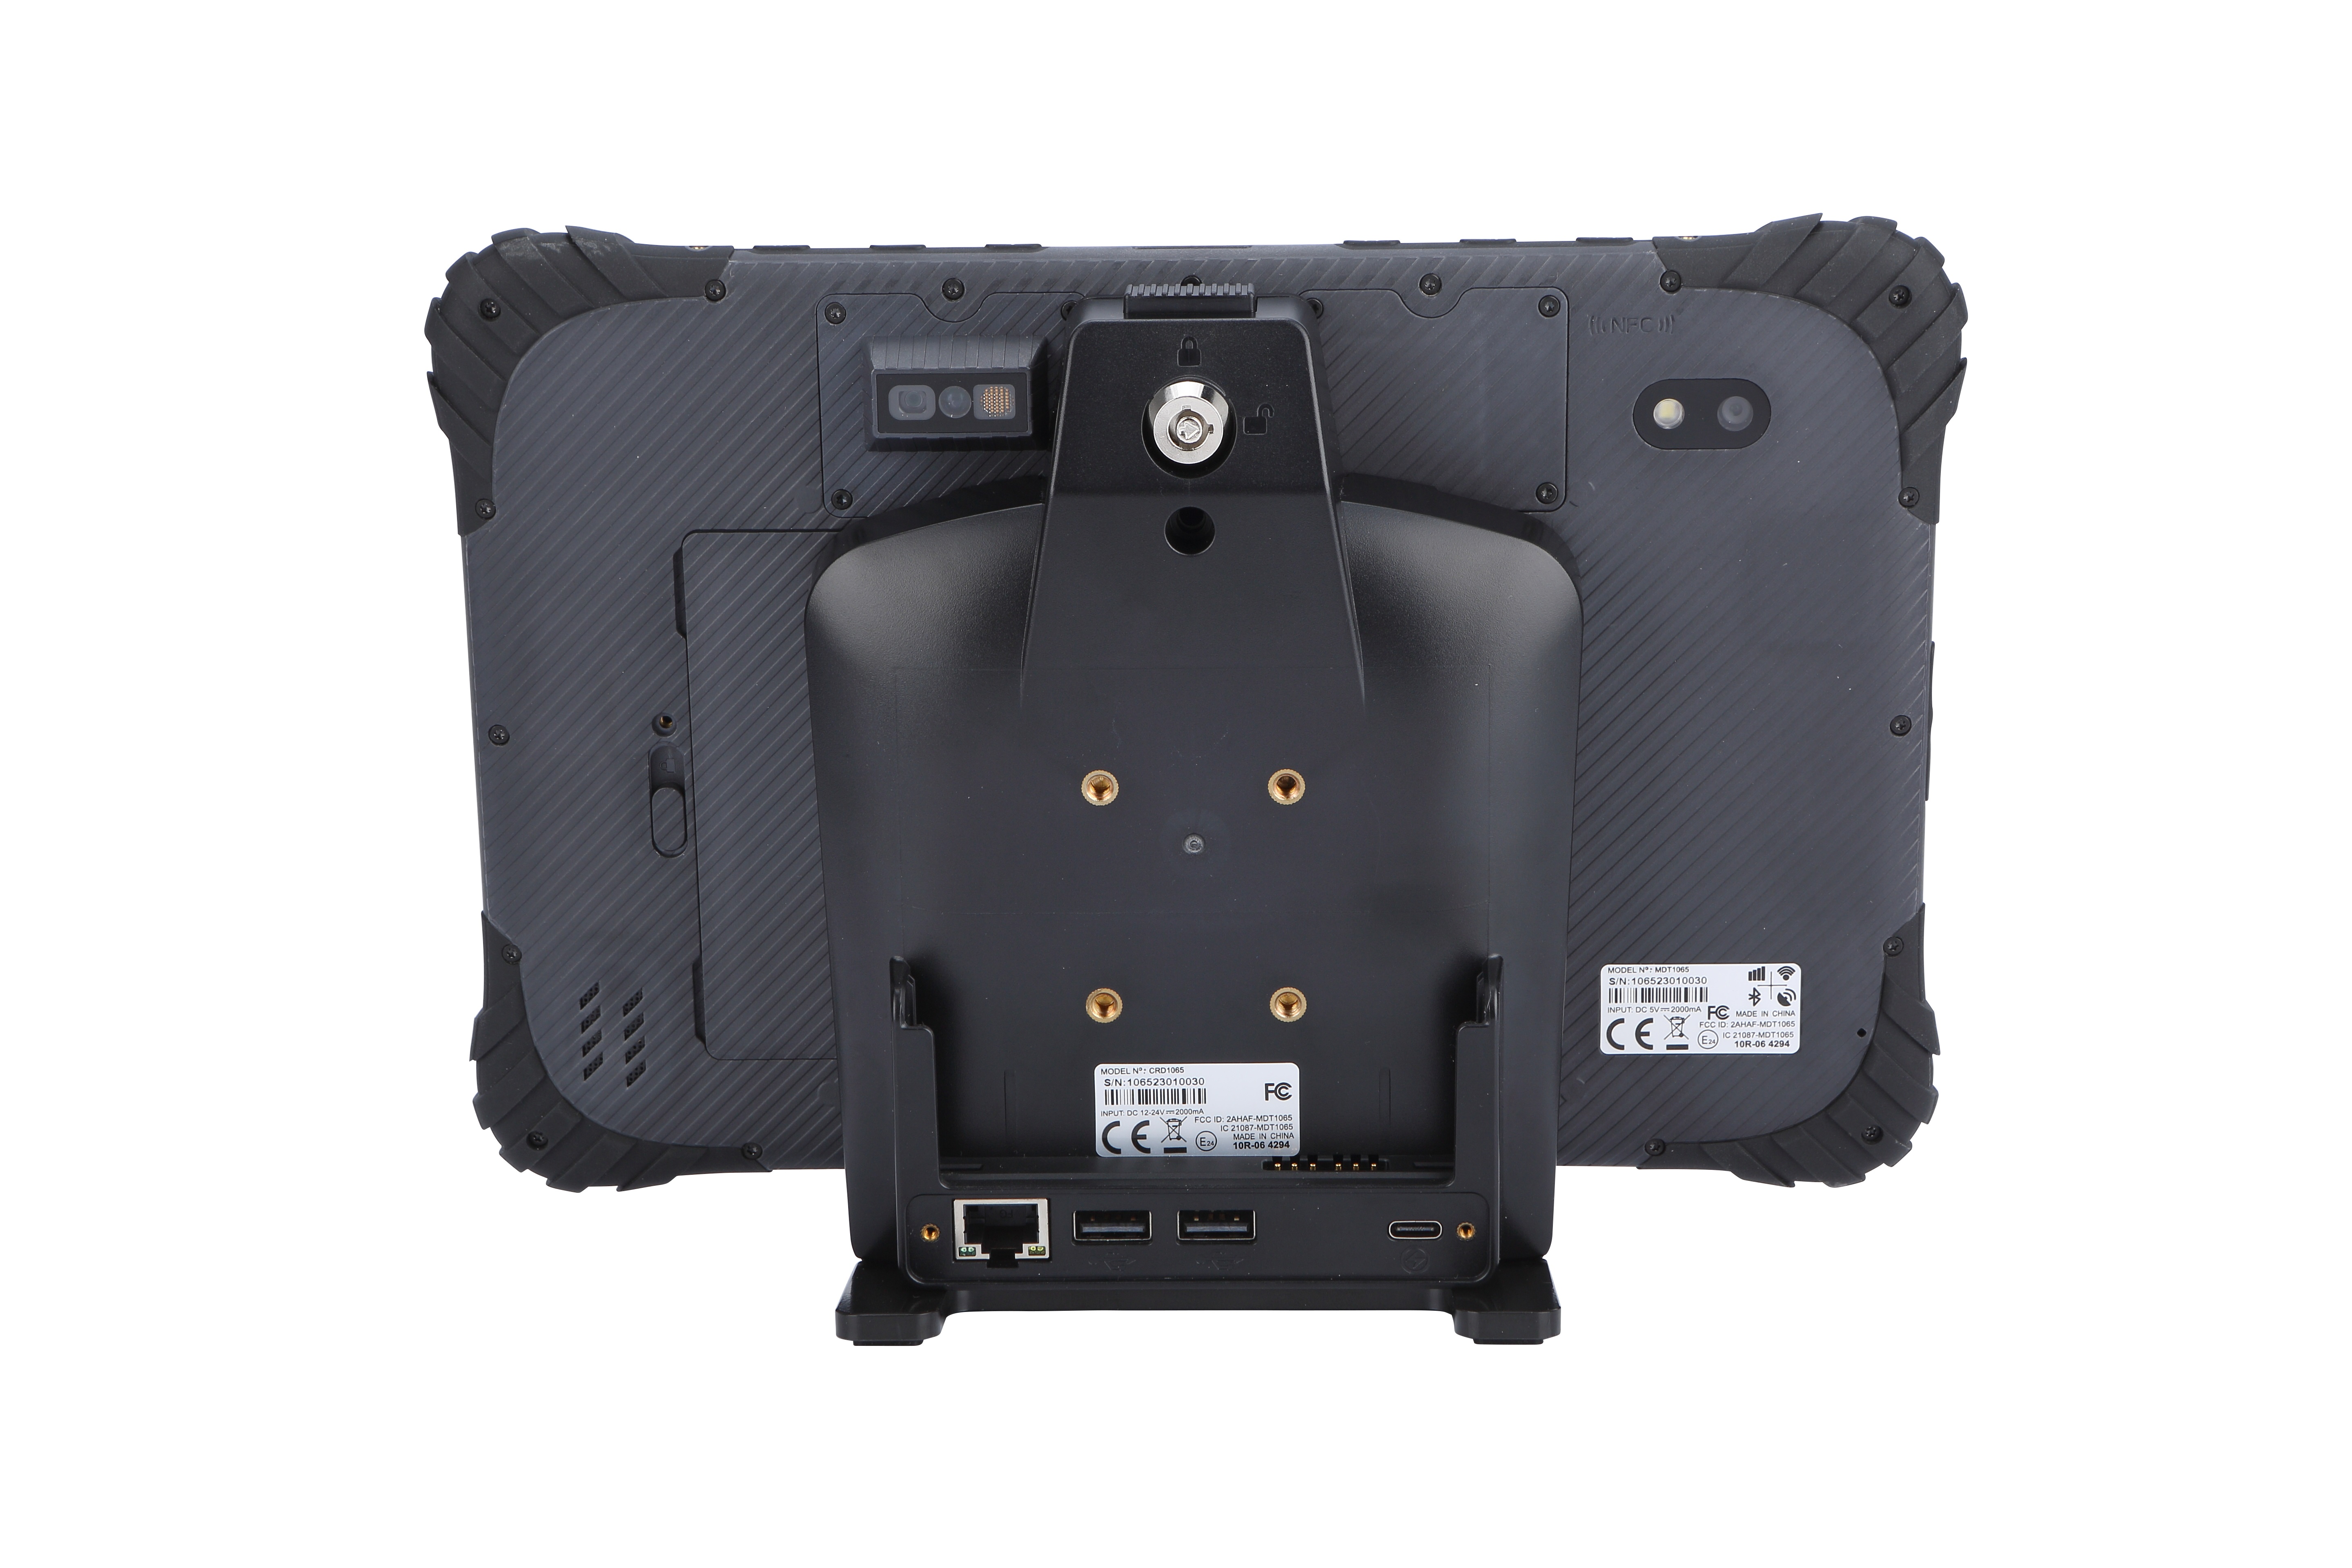 MDT1065 10'' Industrial Android tablet